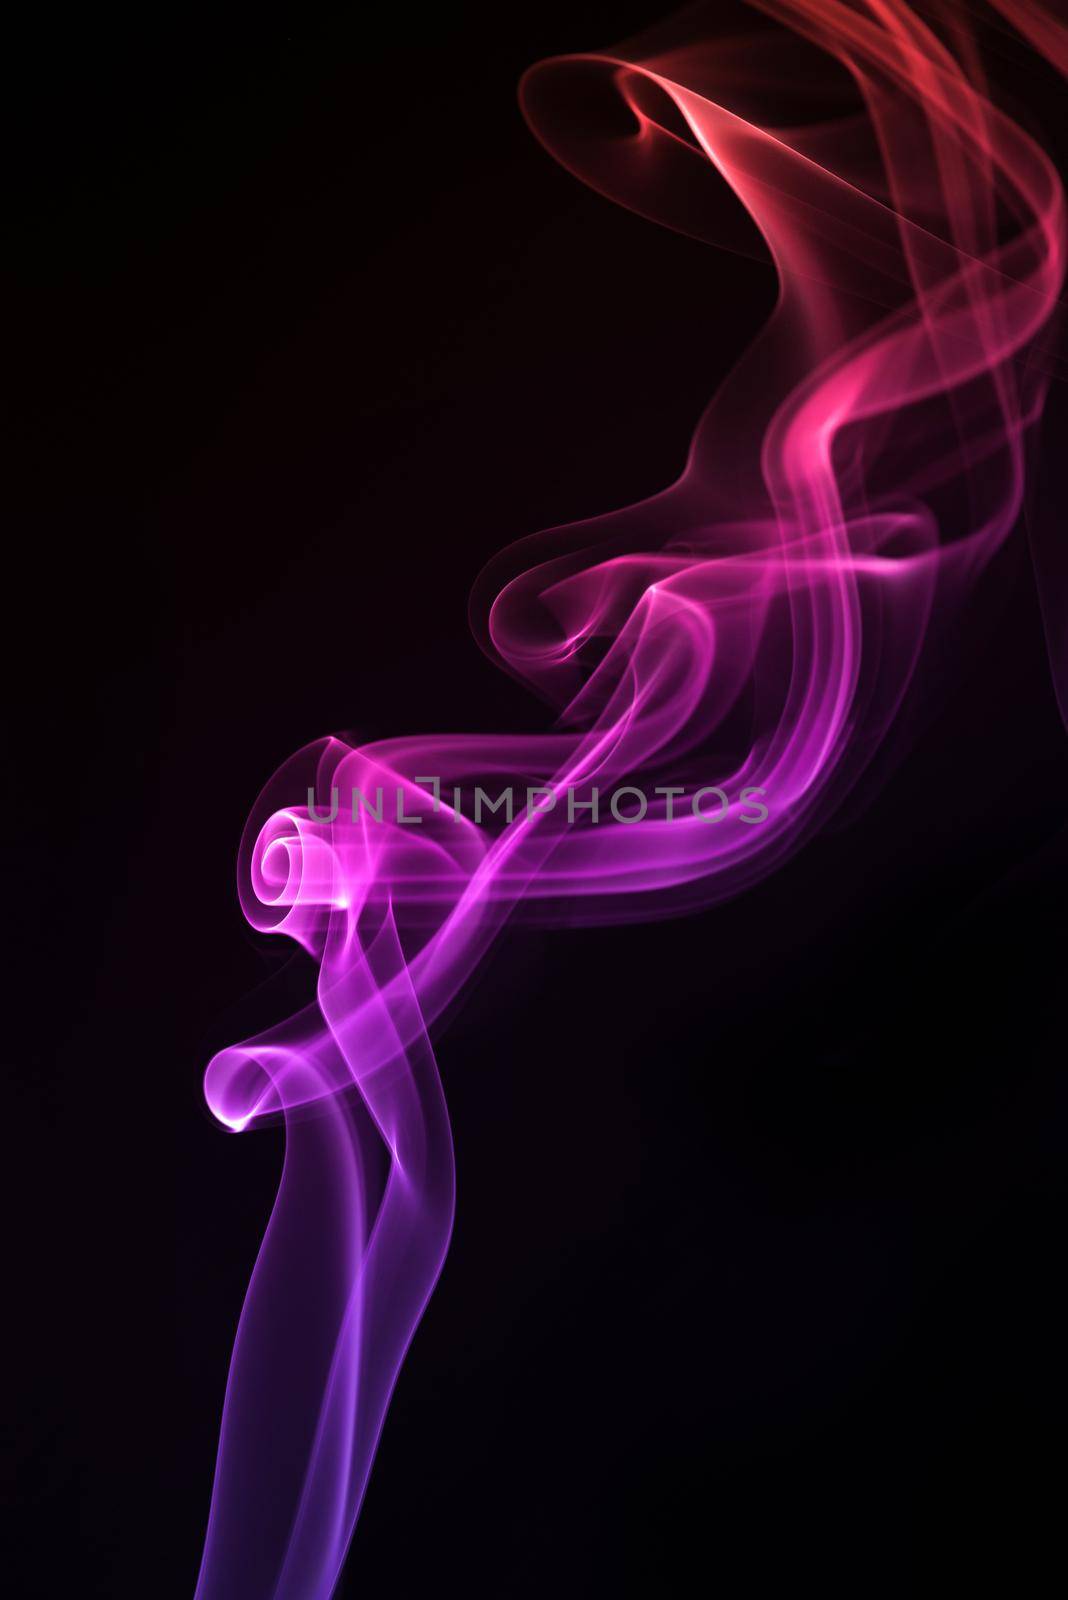 Blue with purple smoke isolated on black background.